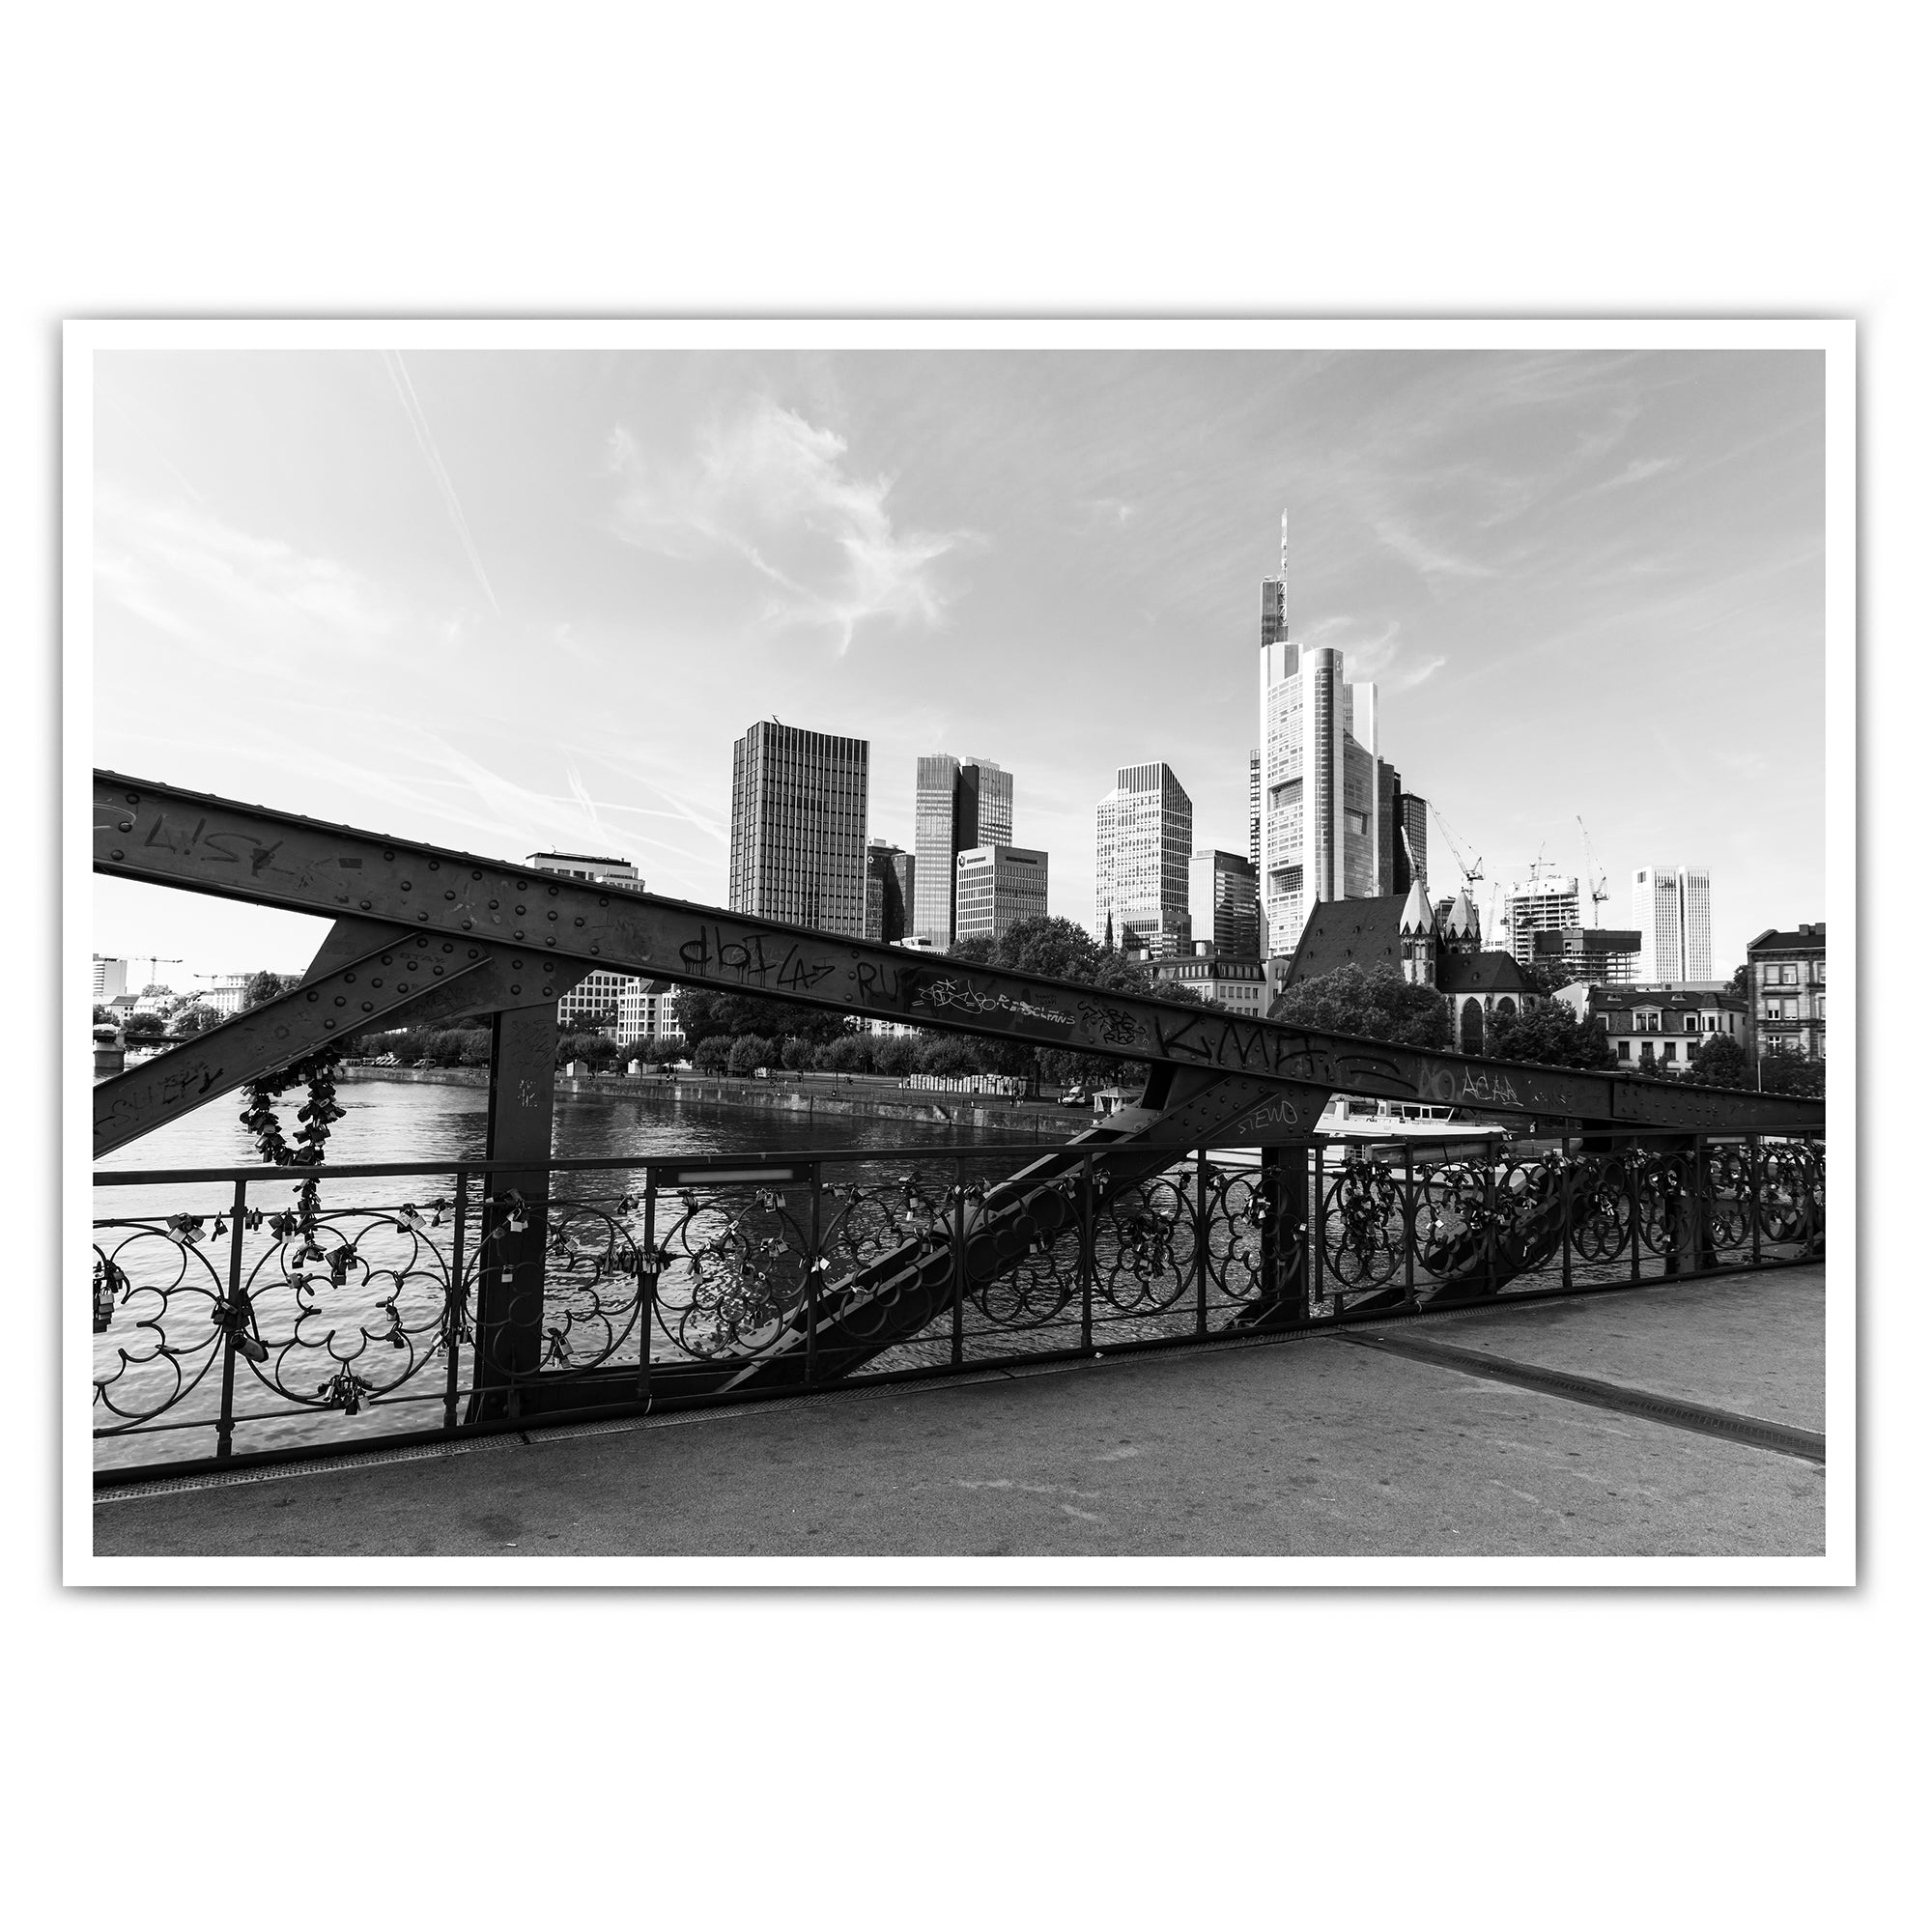 4one-pictures-frankfurt-am-main-poster-skyline-bild-ffm-kunstdruck-shop-5mm_f94d40e8-1531-4bcb-a5e0-1b37966ac28a.jpg